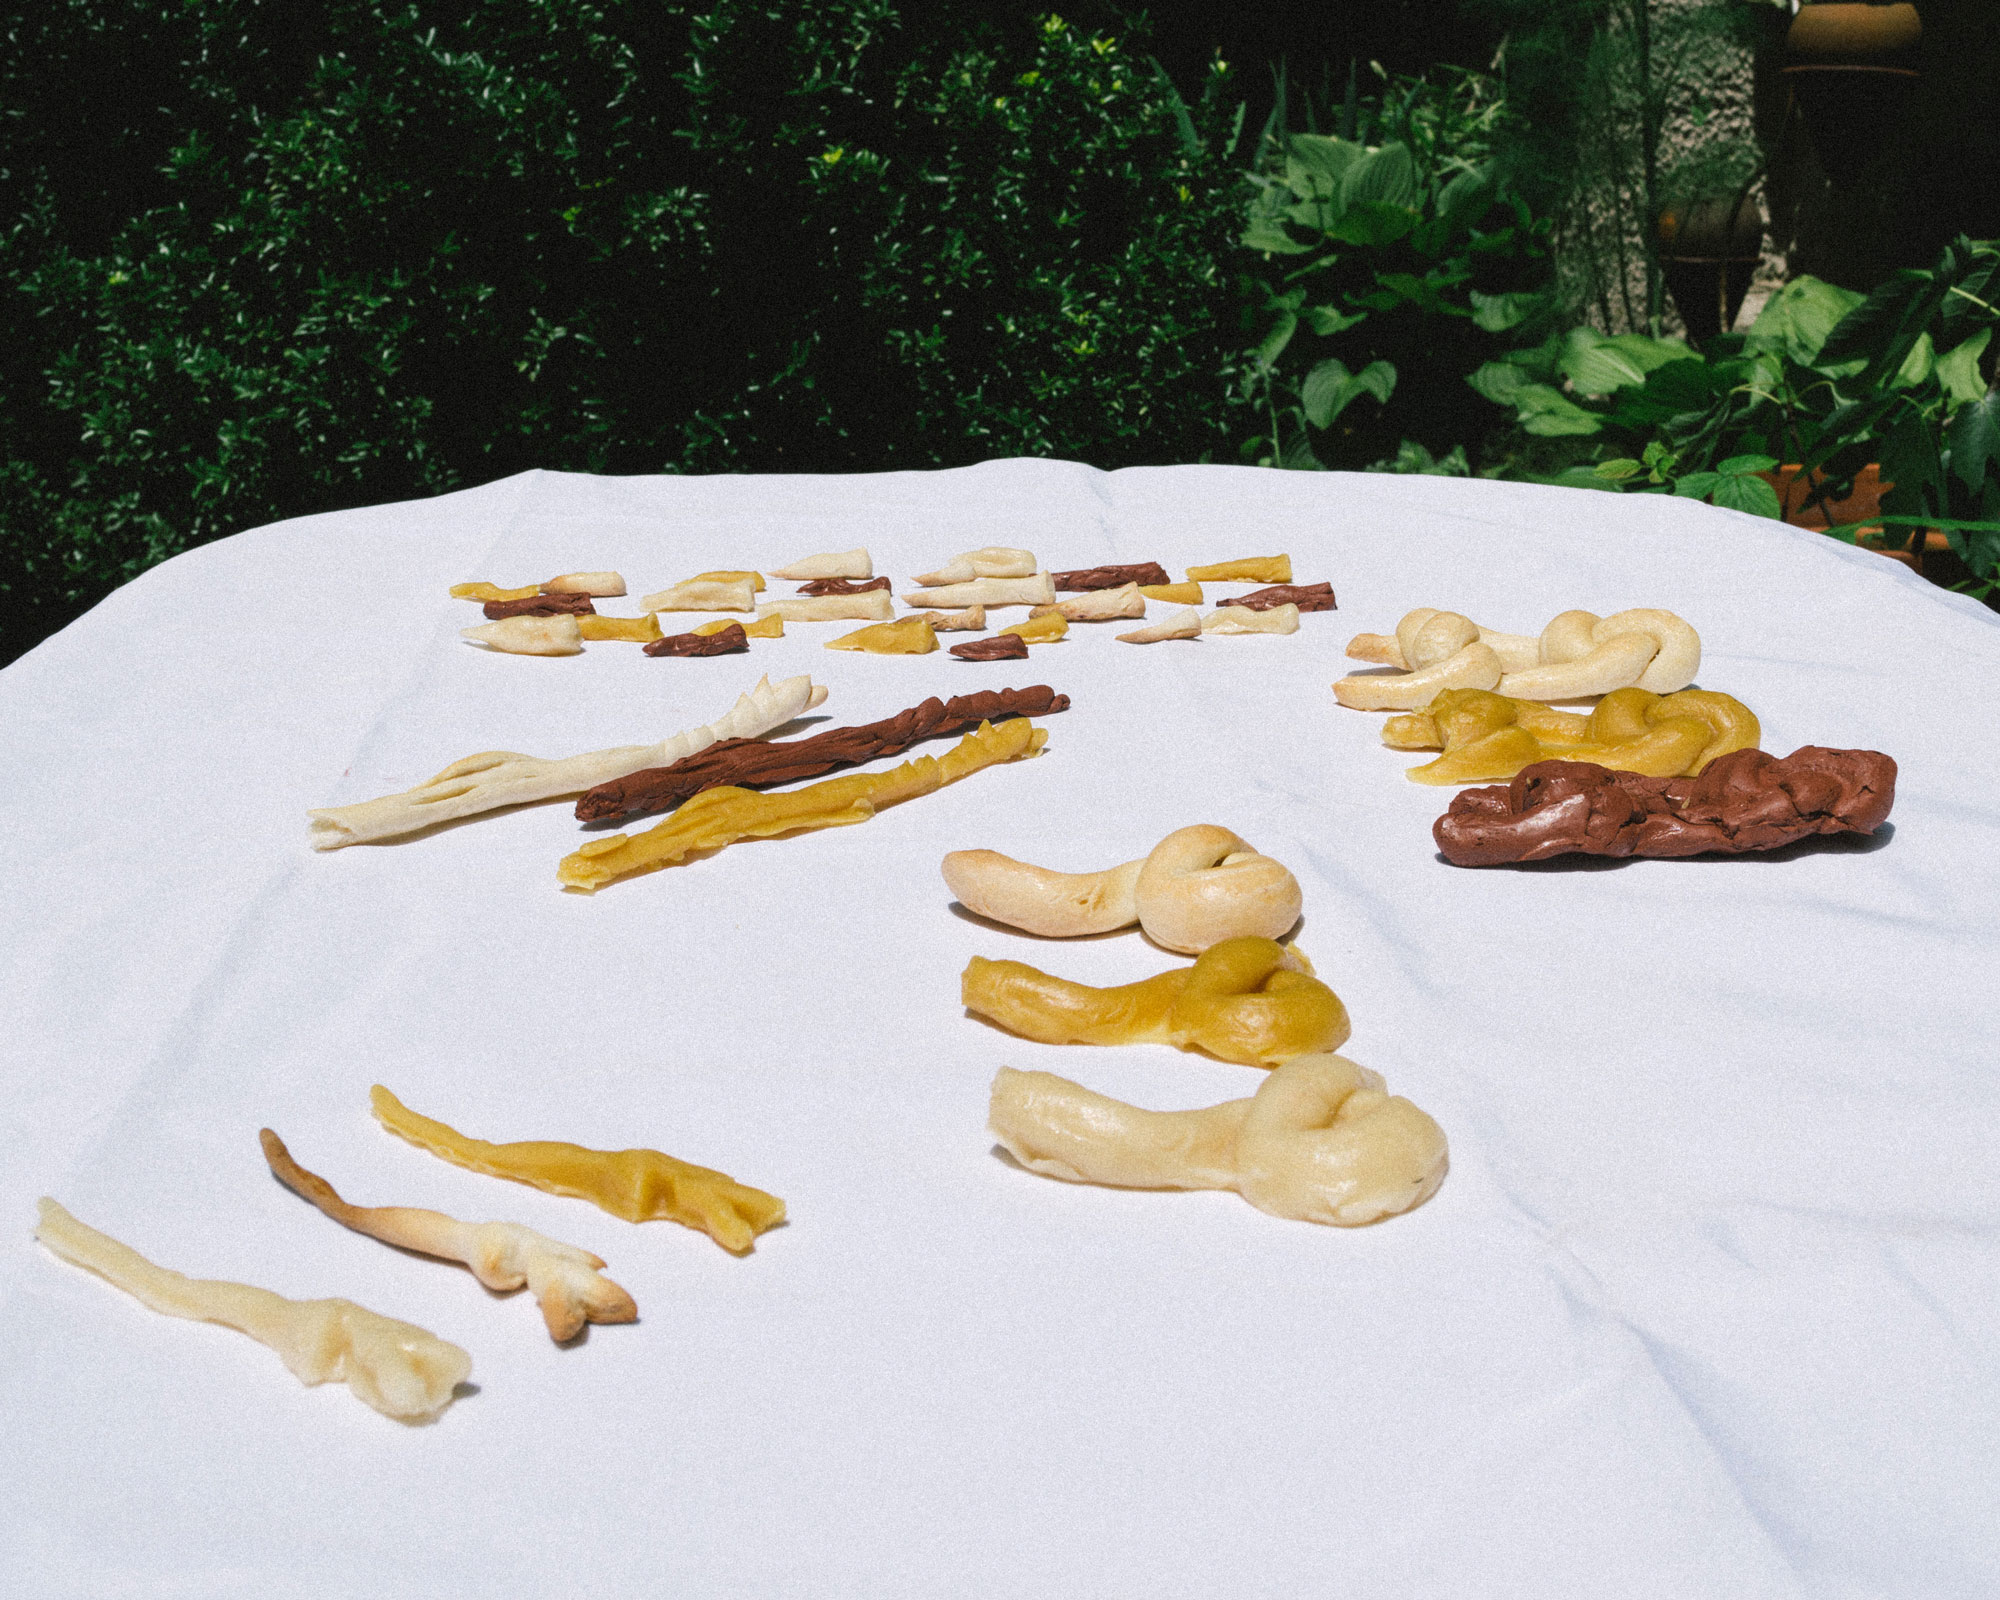 On a white table cloth there are five sets of bread sculptures. In each set there are three of the same shape. Of the five shapes there is a wand-like shape, a twisted snack, a stick, small disfigured cones, and knots. The table cloth is set ouside against the hint of a verdant forest background.